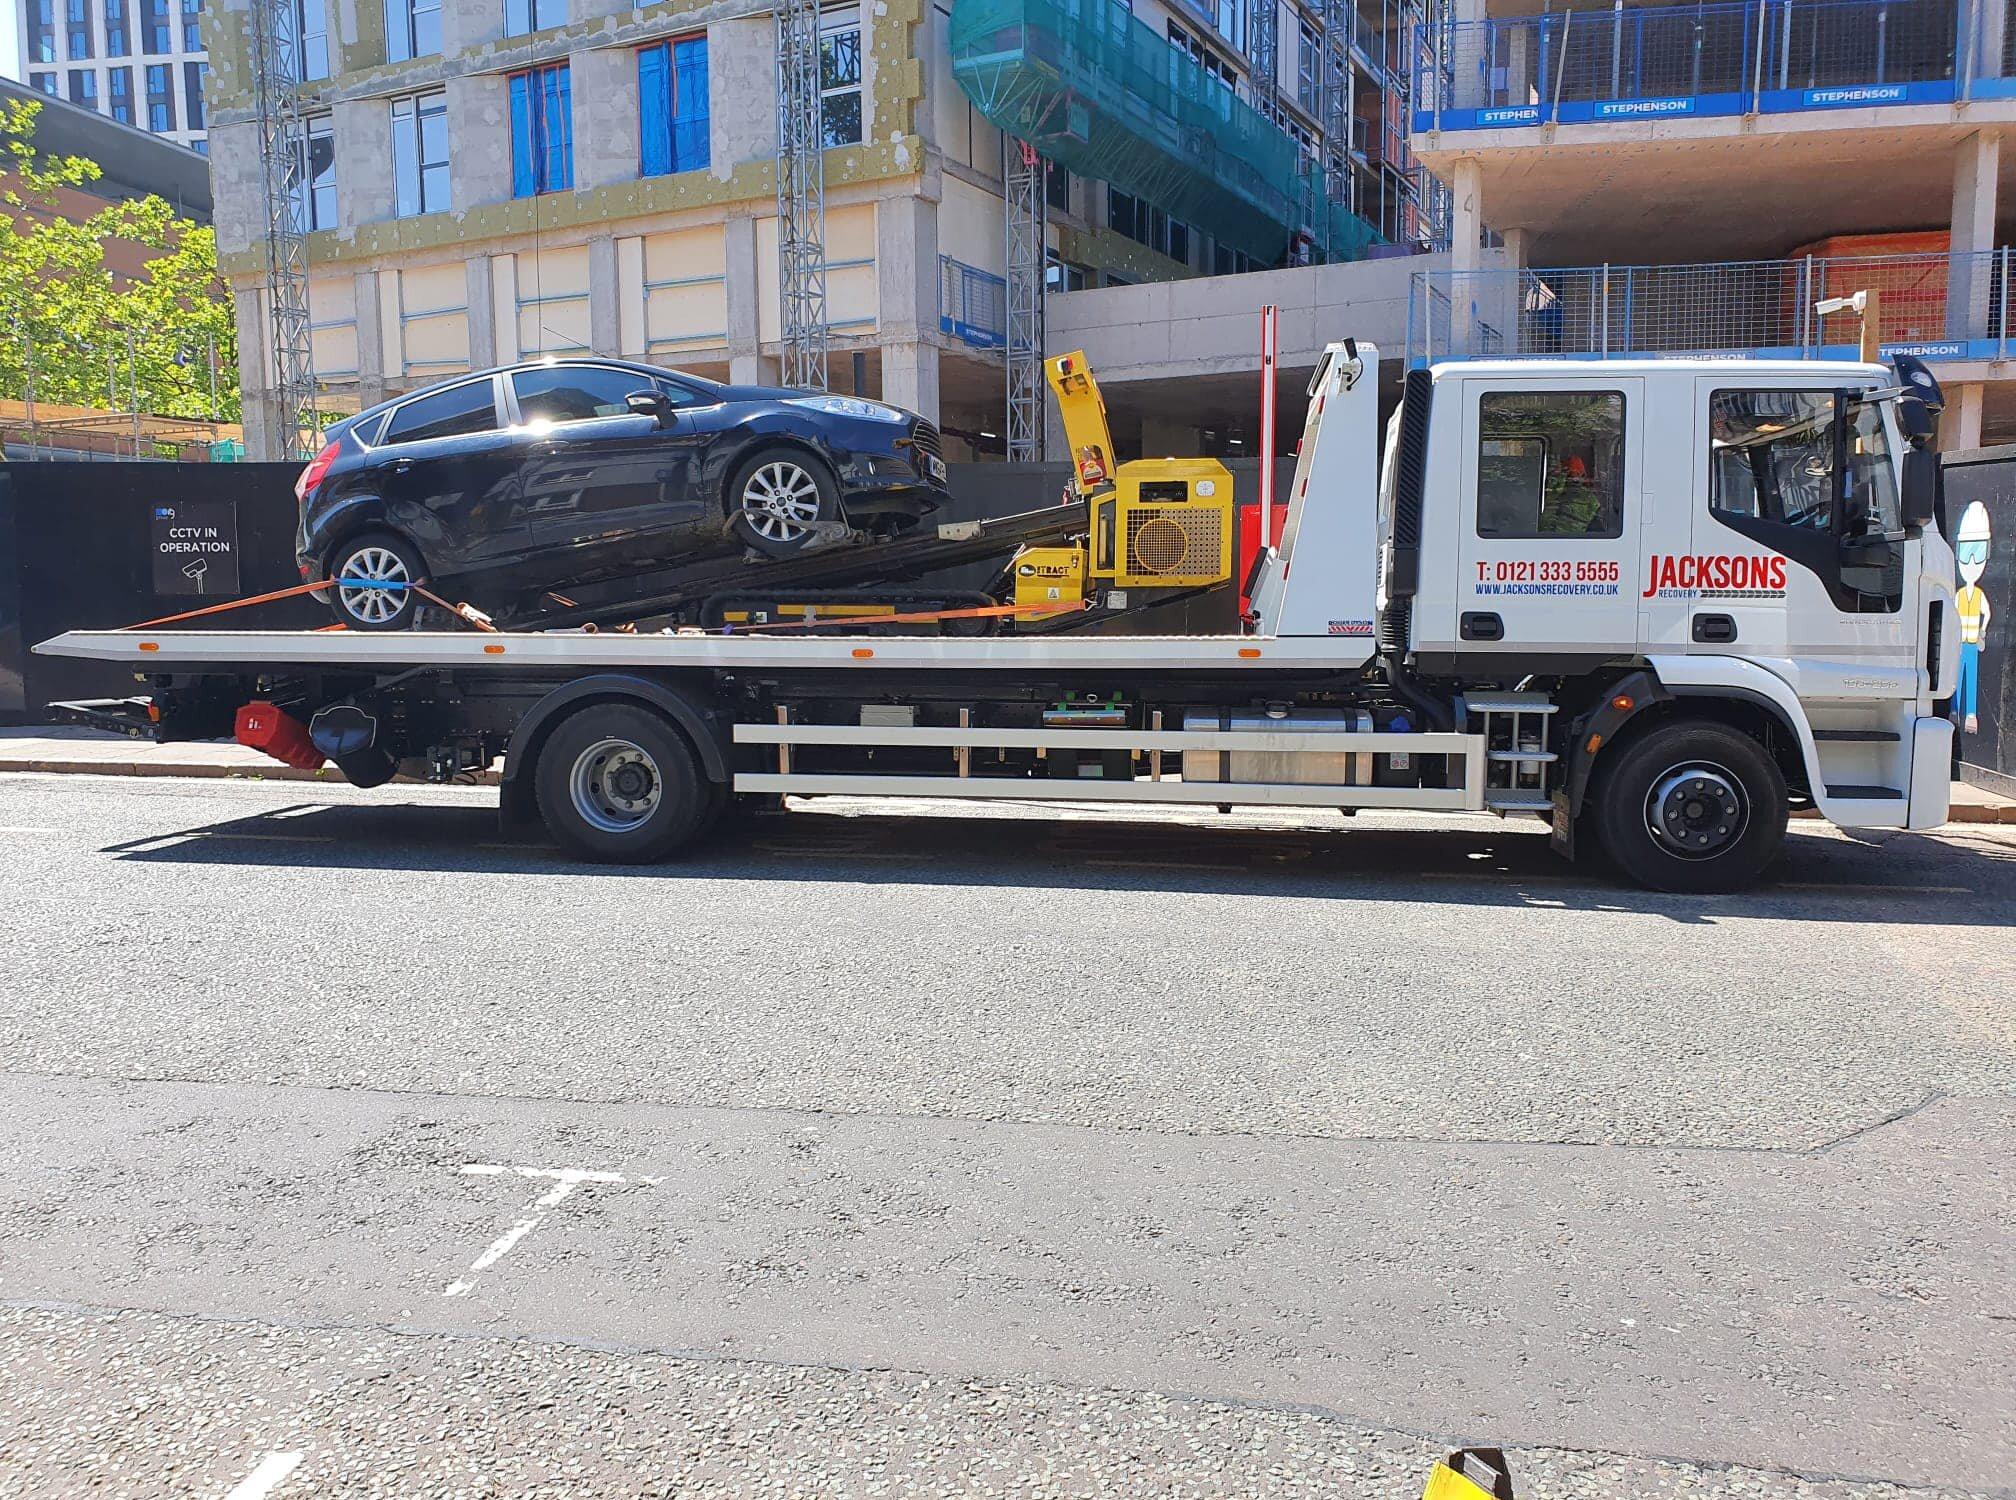 Jacksons Recovery Ltd – NG2 4DH, Daleside Rd – Vehicle Service Phone ...